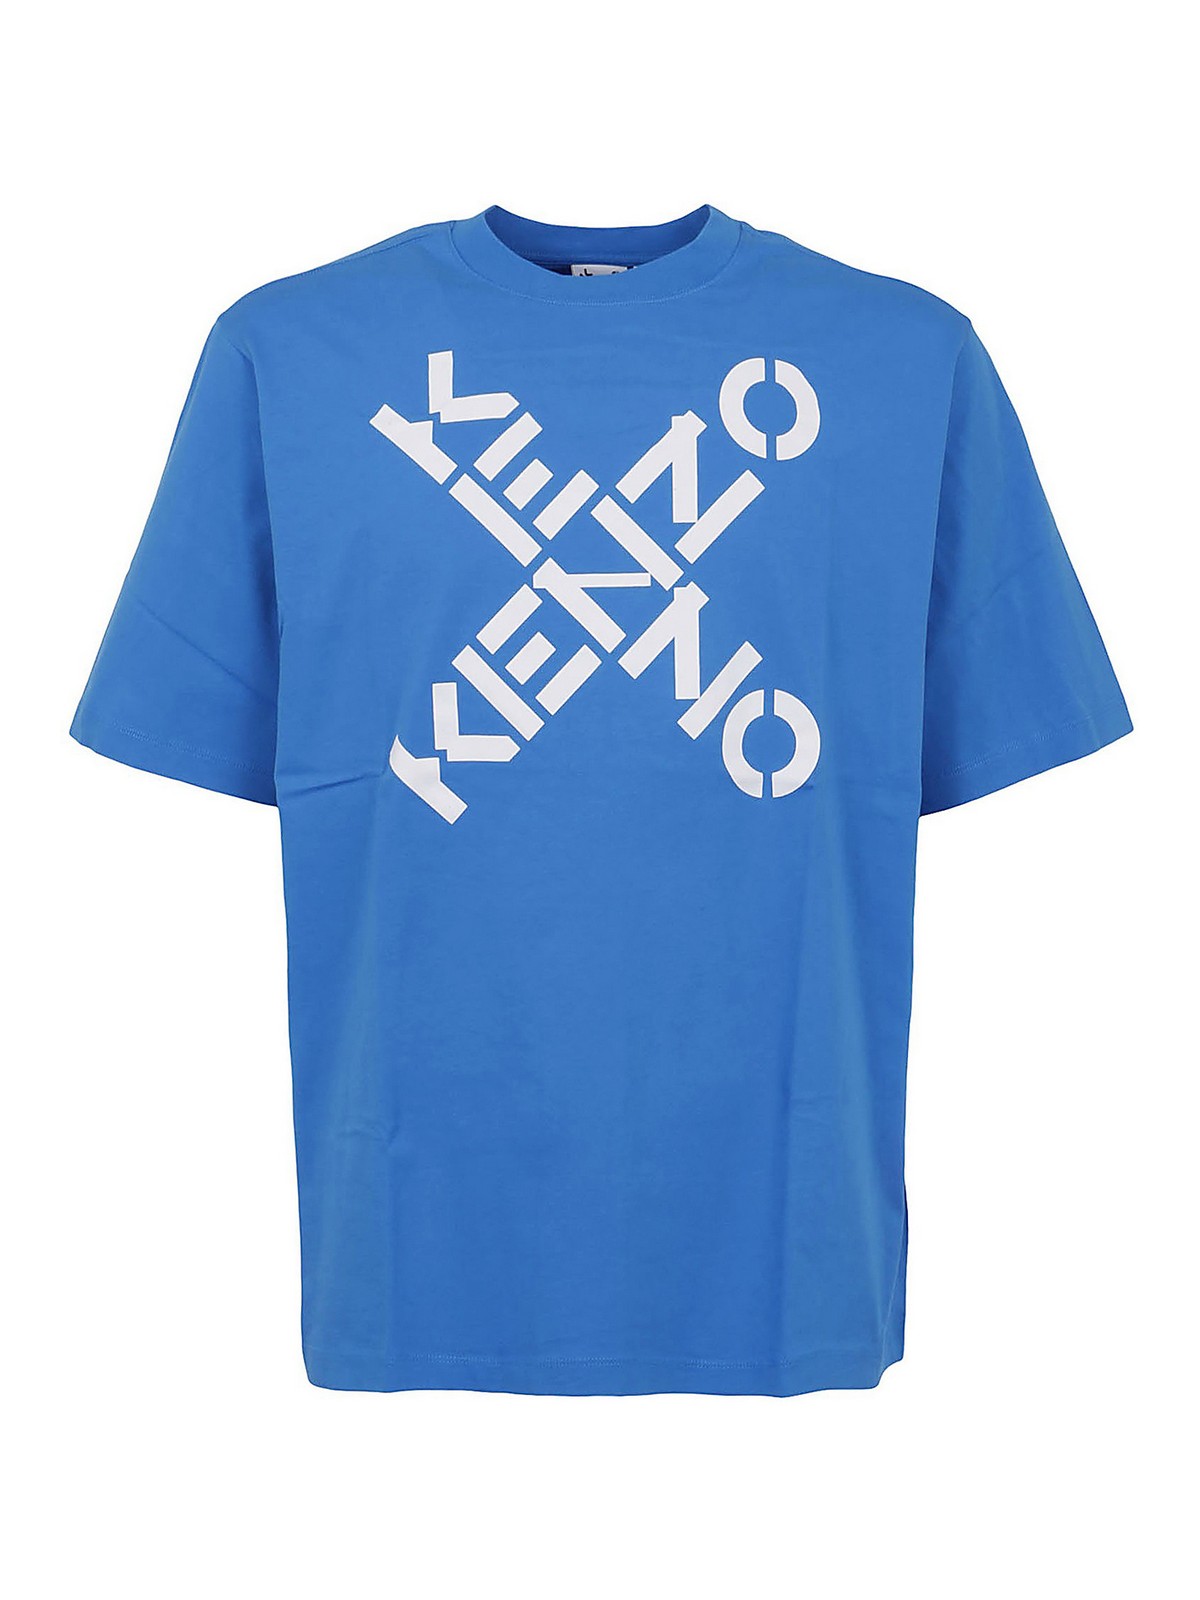 Tシャツ Kenzo - Tシャツ - Big X - FA65TS5024SJ69 | THEBS